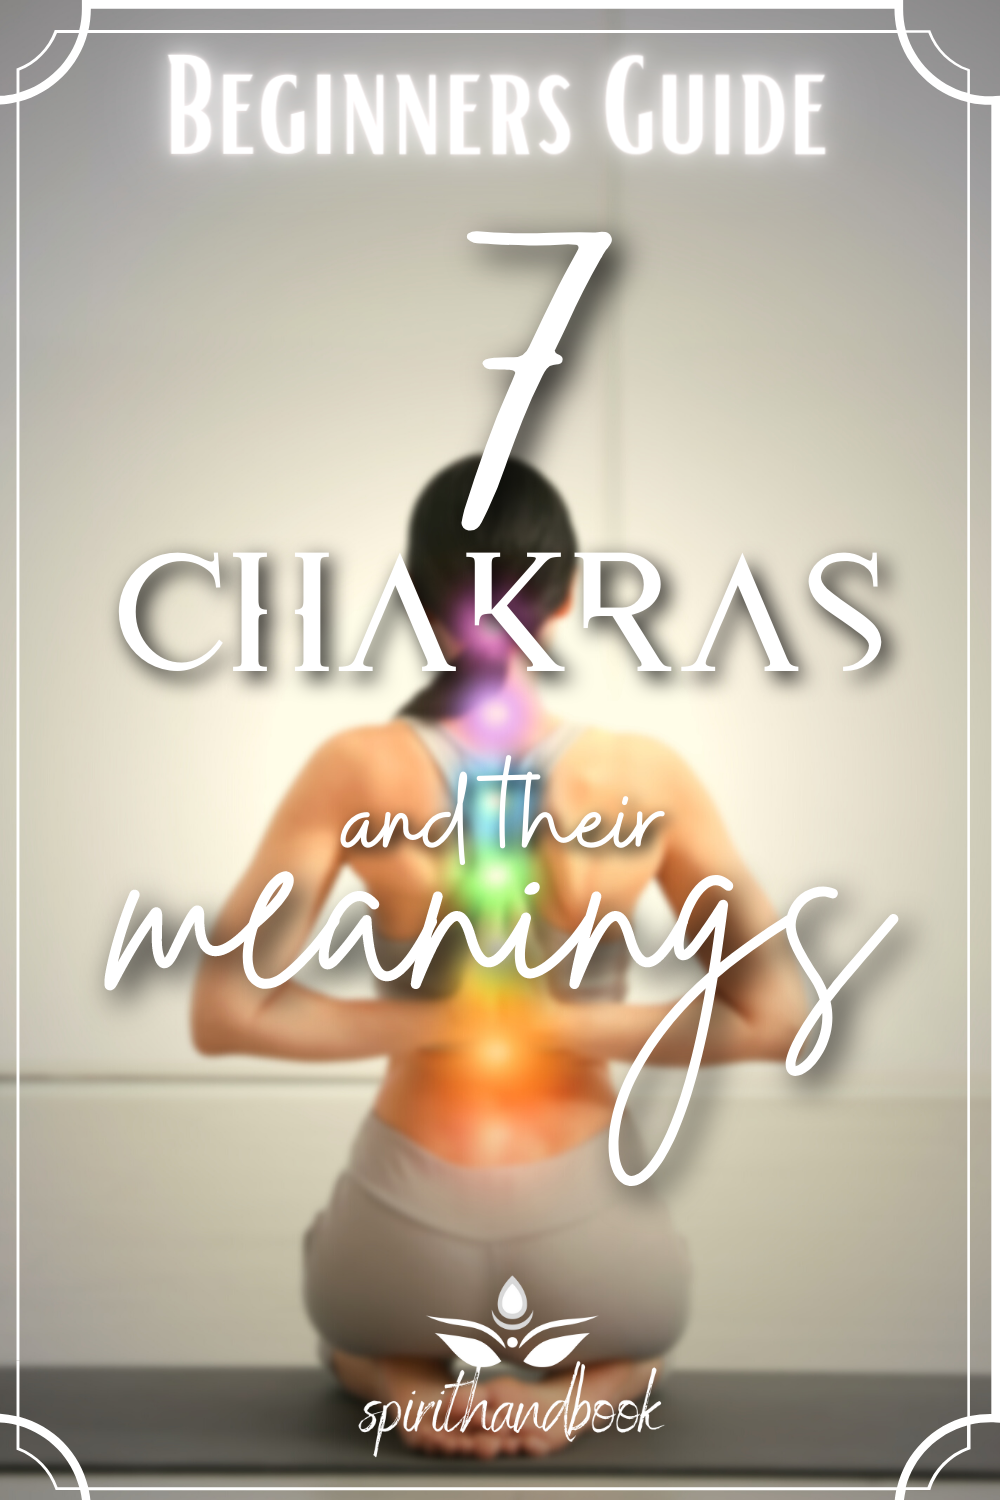 A Beginners Guide To The 7 Chakras & Their Meanings